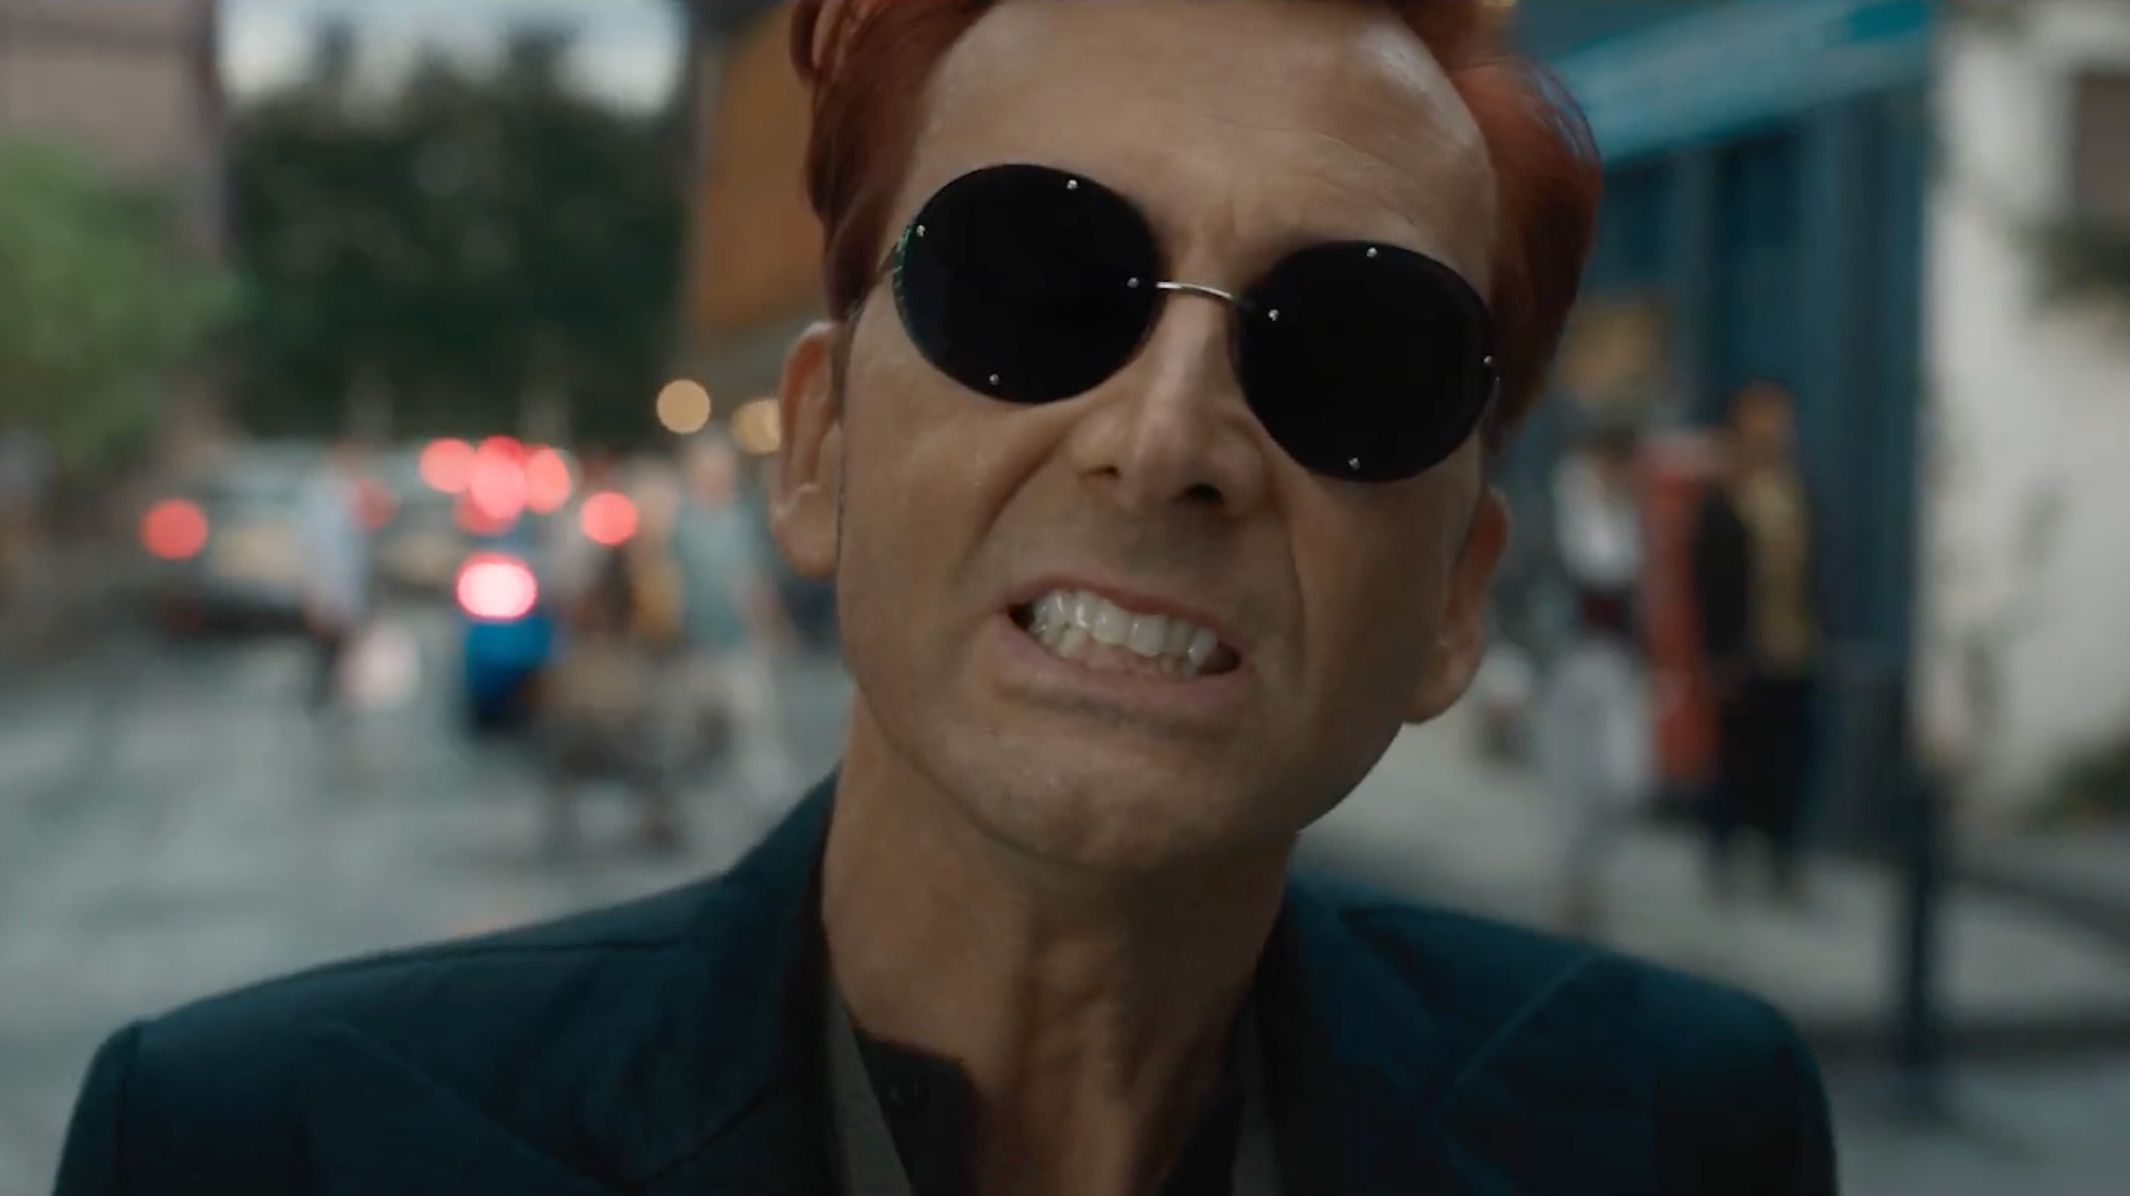 Good Omens star David Tennant recalls favourite outfit from season 2